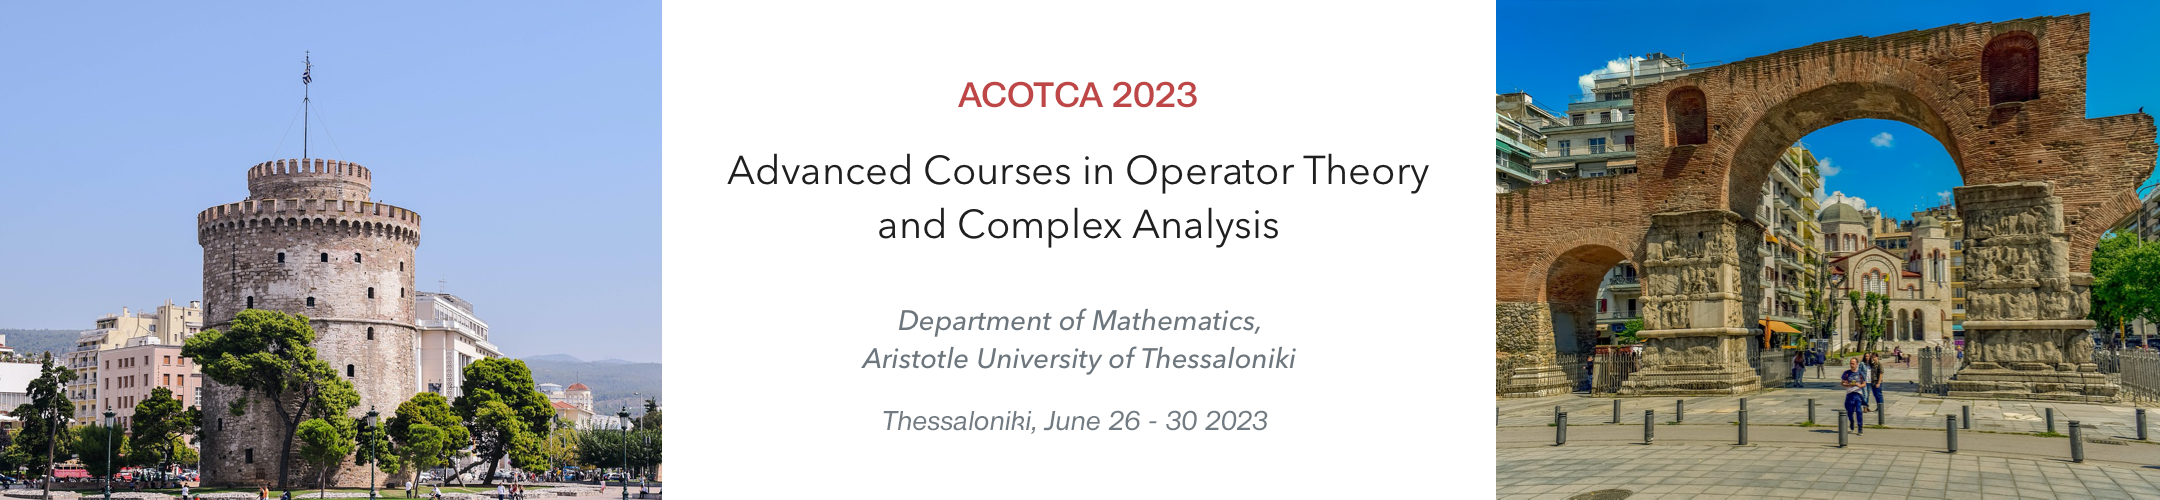 Advanced Courses in Operator Theory and Complex Analysis